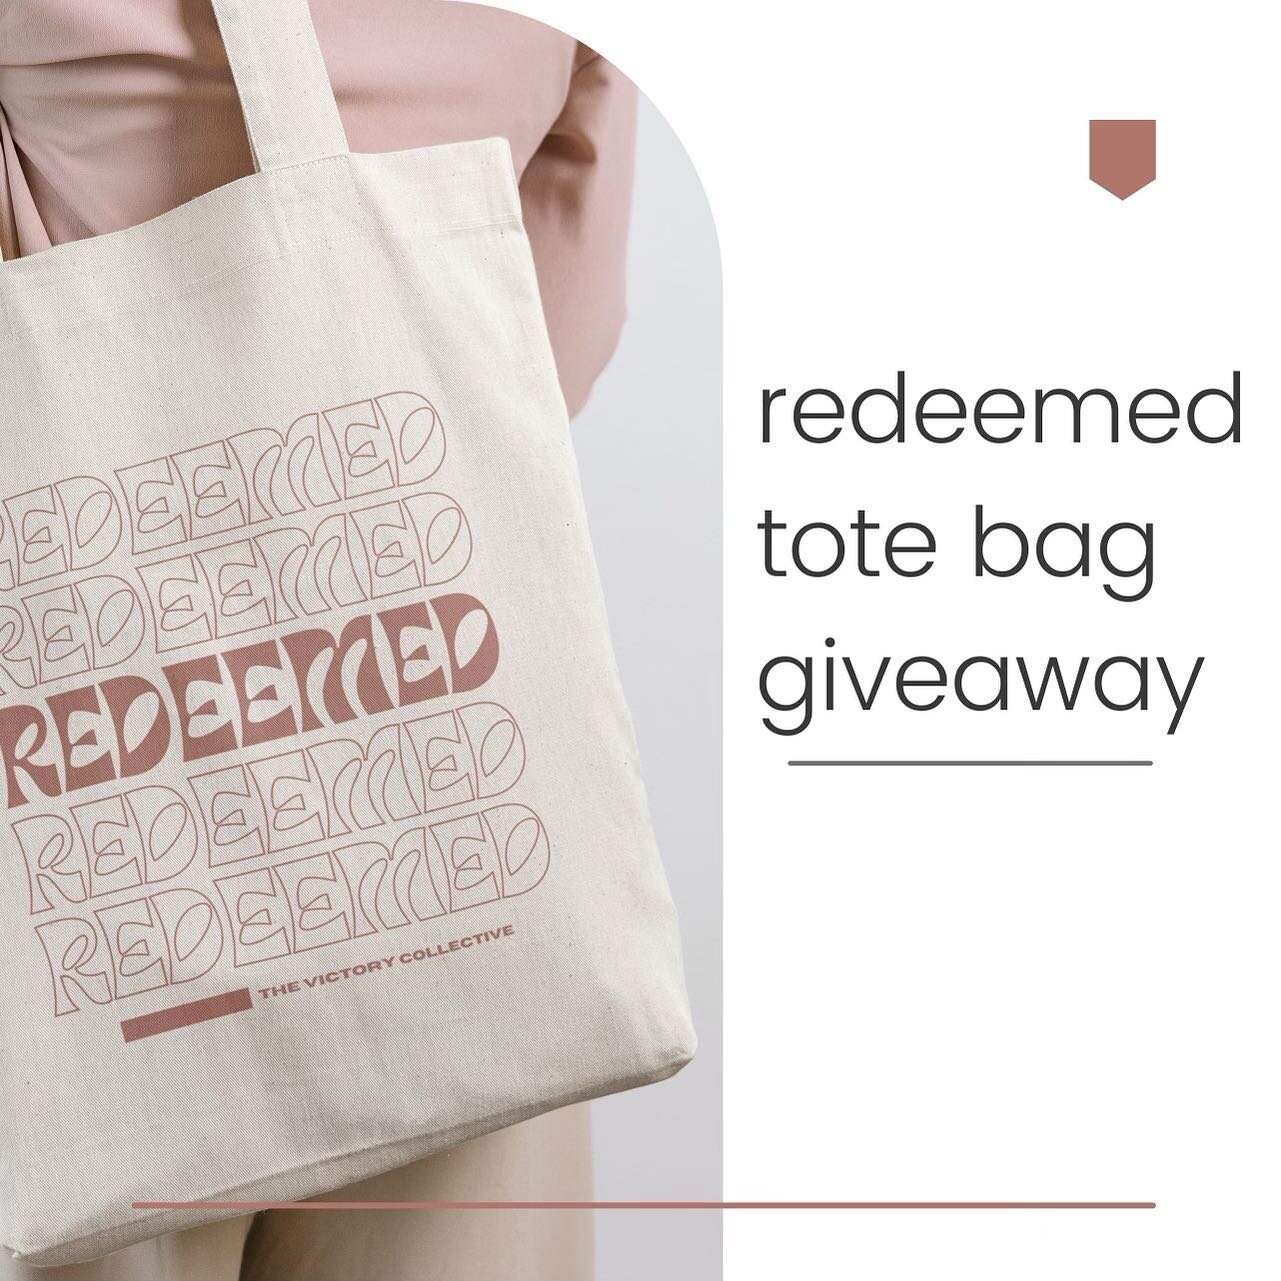 In honor of Katie&rsquo;s birthday, we are giving away one of our Redeemed tote bags from our shop!!😊

All you have to do is:
📲Follow @the_victory_collective 
👍Like this post 
🎁Comment the best (or worst) birthday present you&rsquo;ve ever receiv